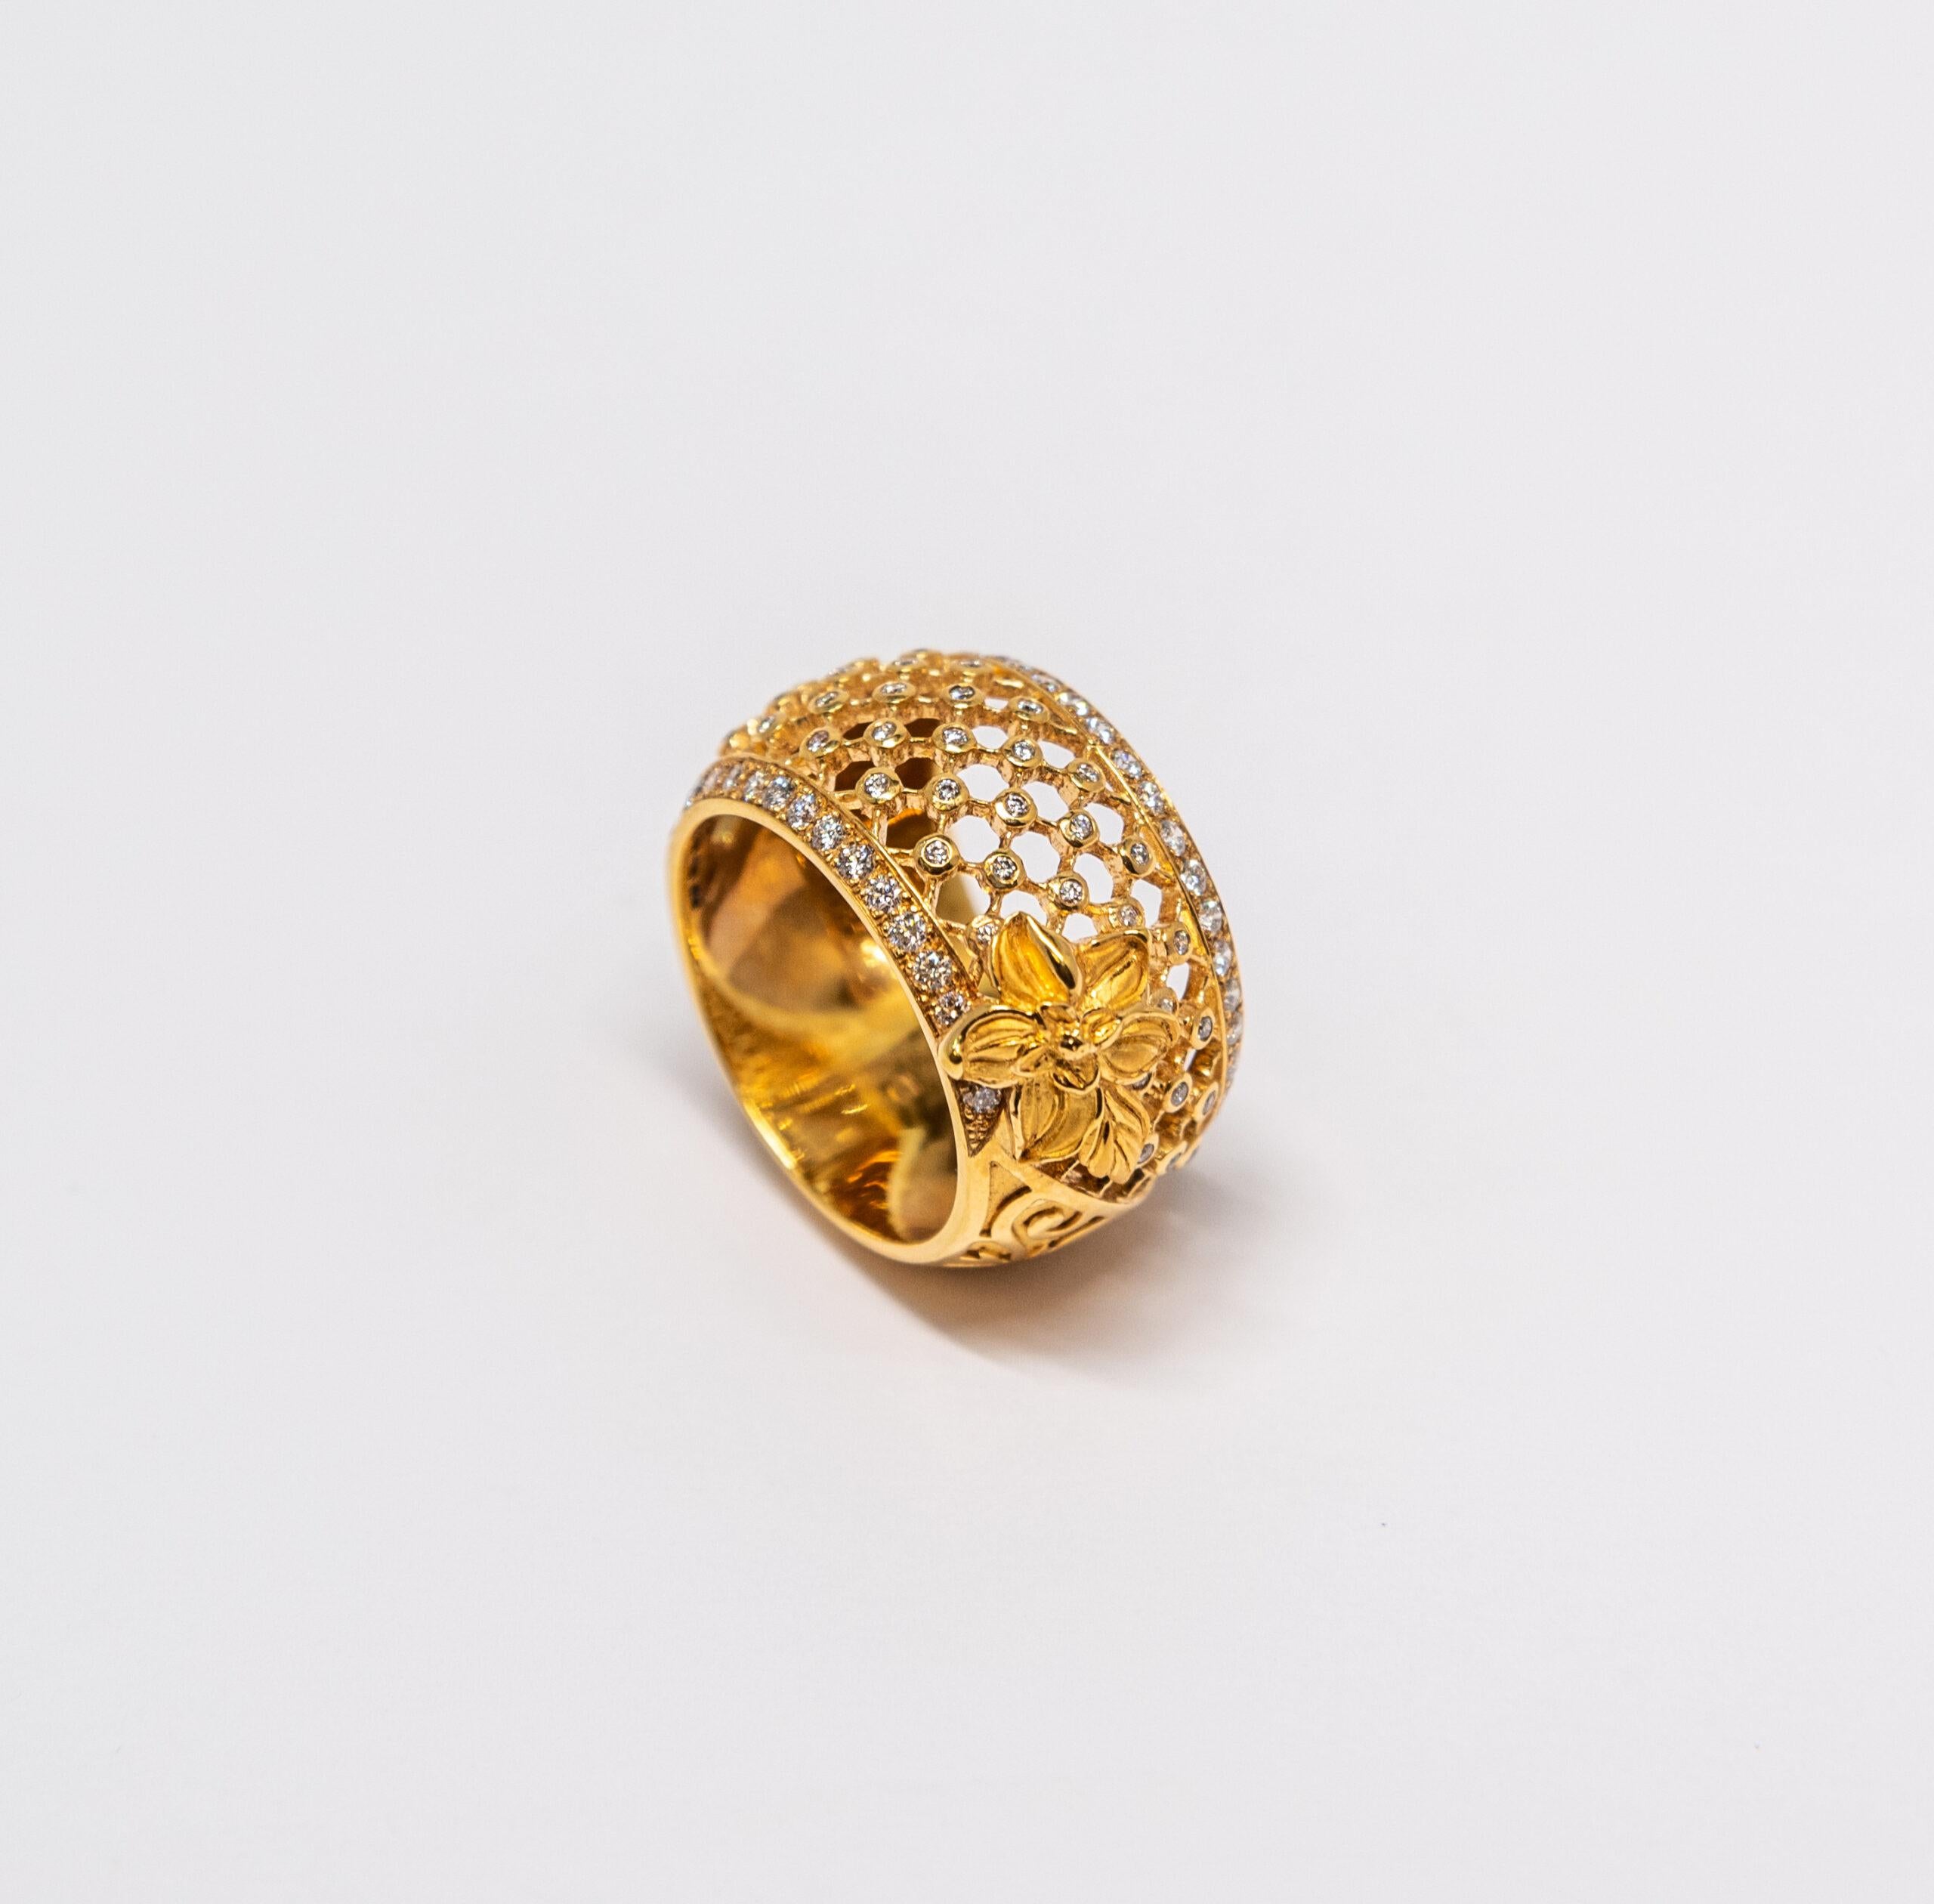 This ring is made of 18K Yellow Gold. The net pattern is set with 75 Diamonds (~0.68ct) and yellow gold handmade flower.

The Size – 56 (7.5 US)